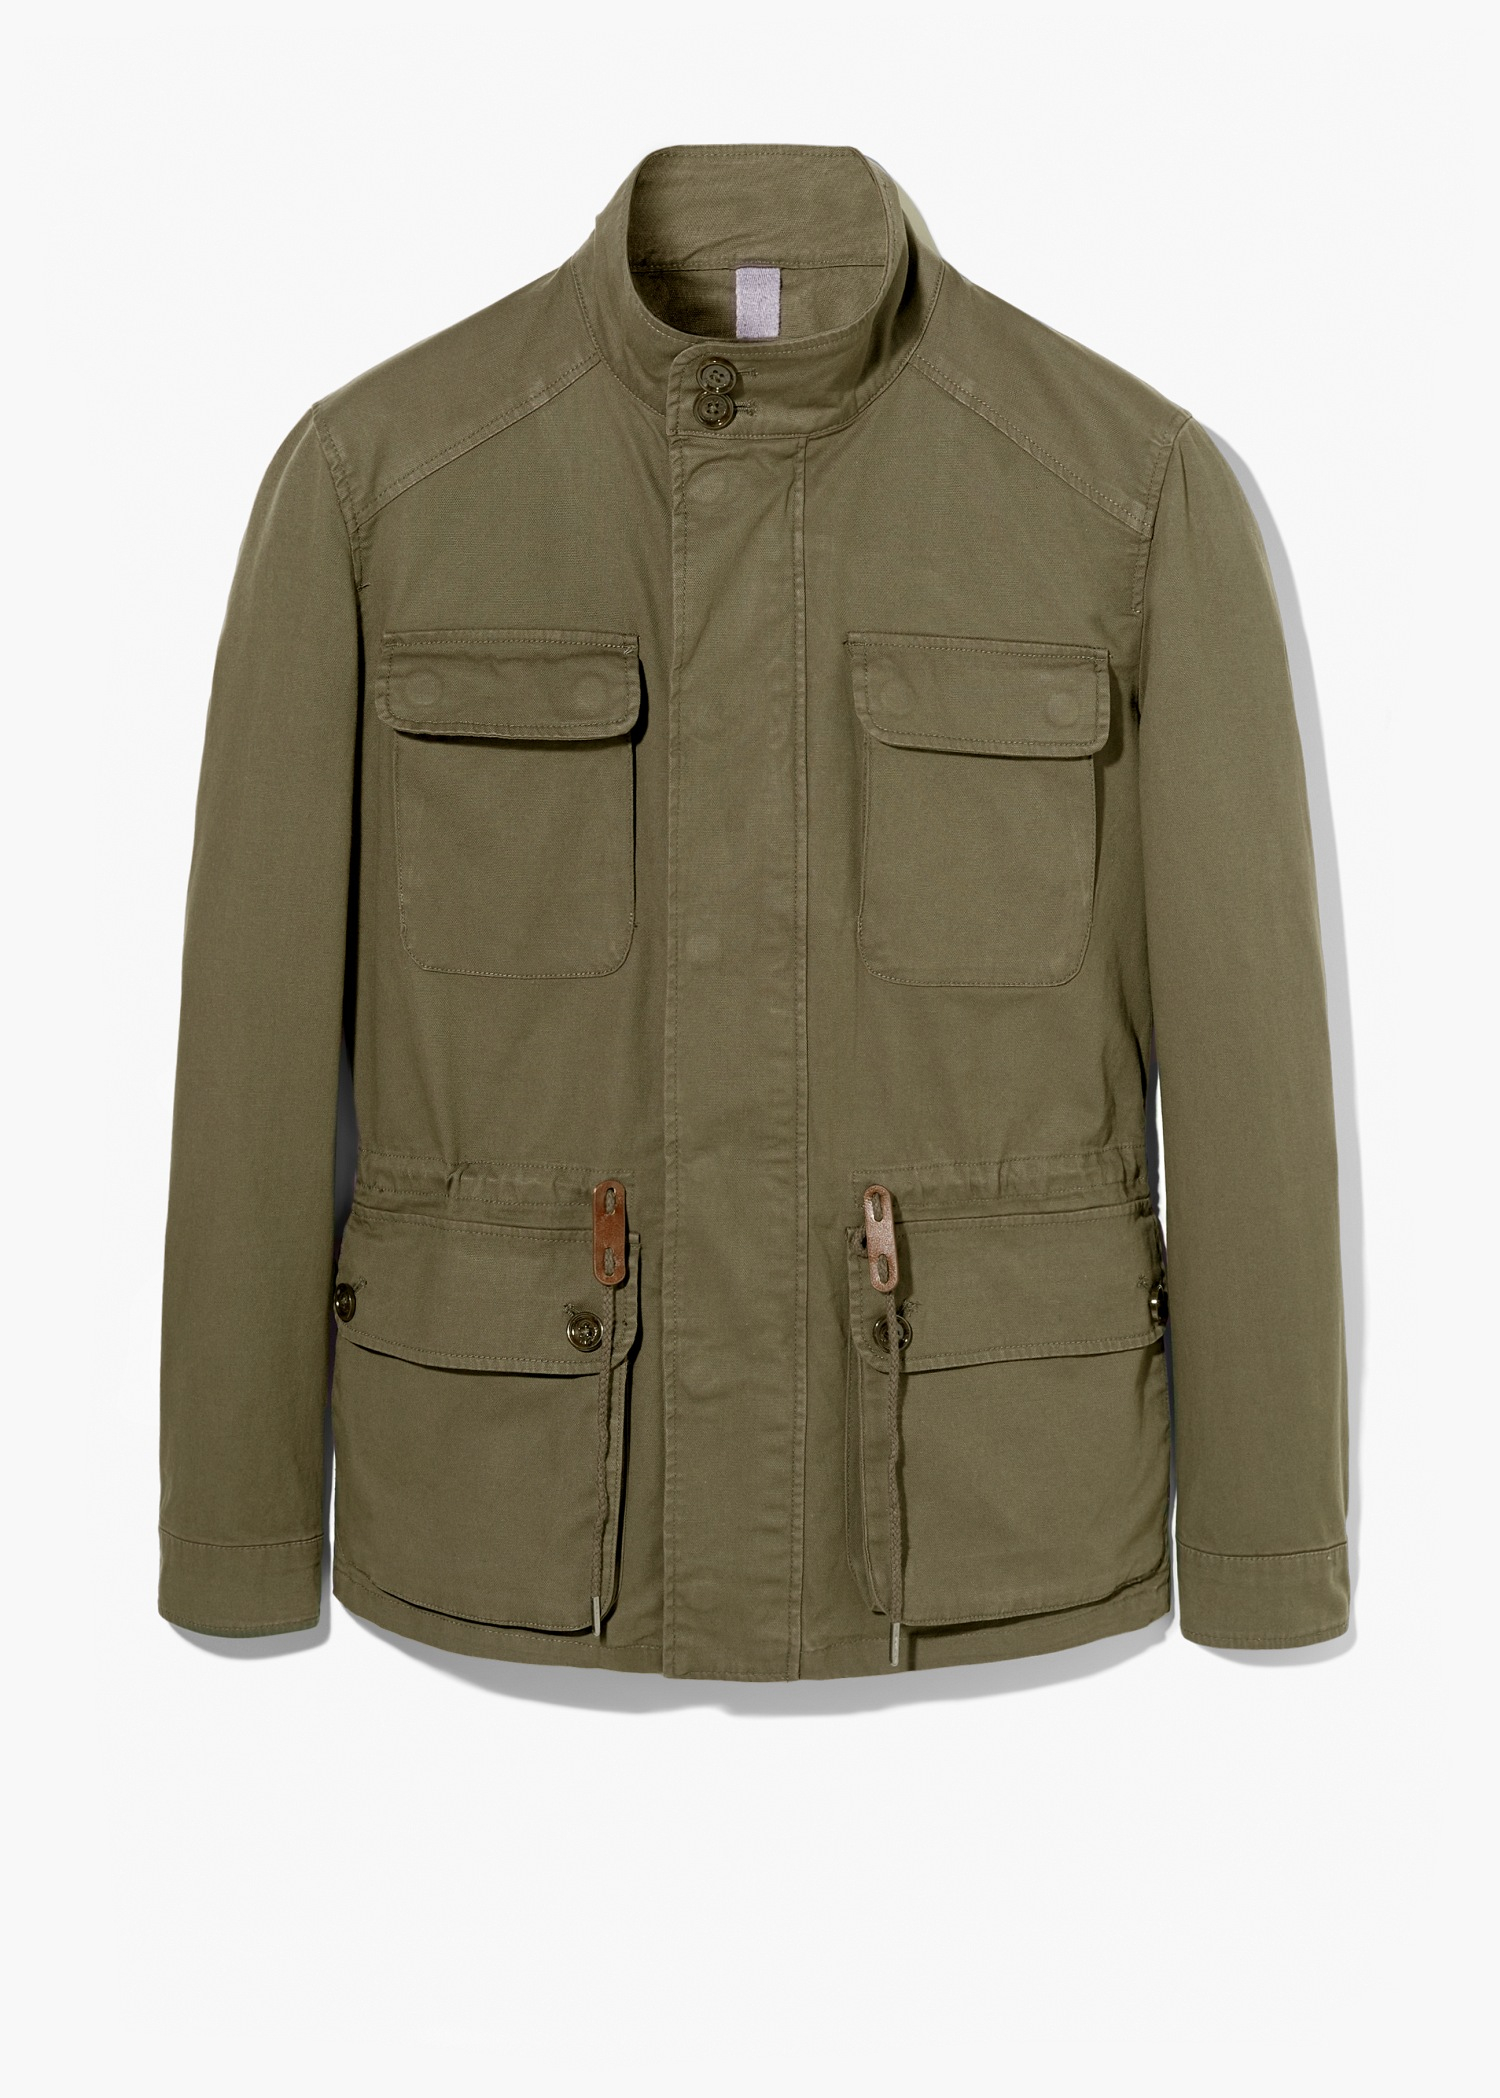 Lyst - Mango Cotton-Canvas Field Jacket in Natural for Men1500 x 2098